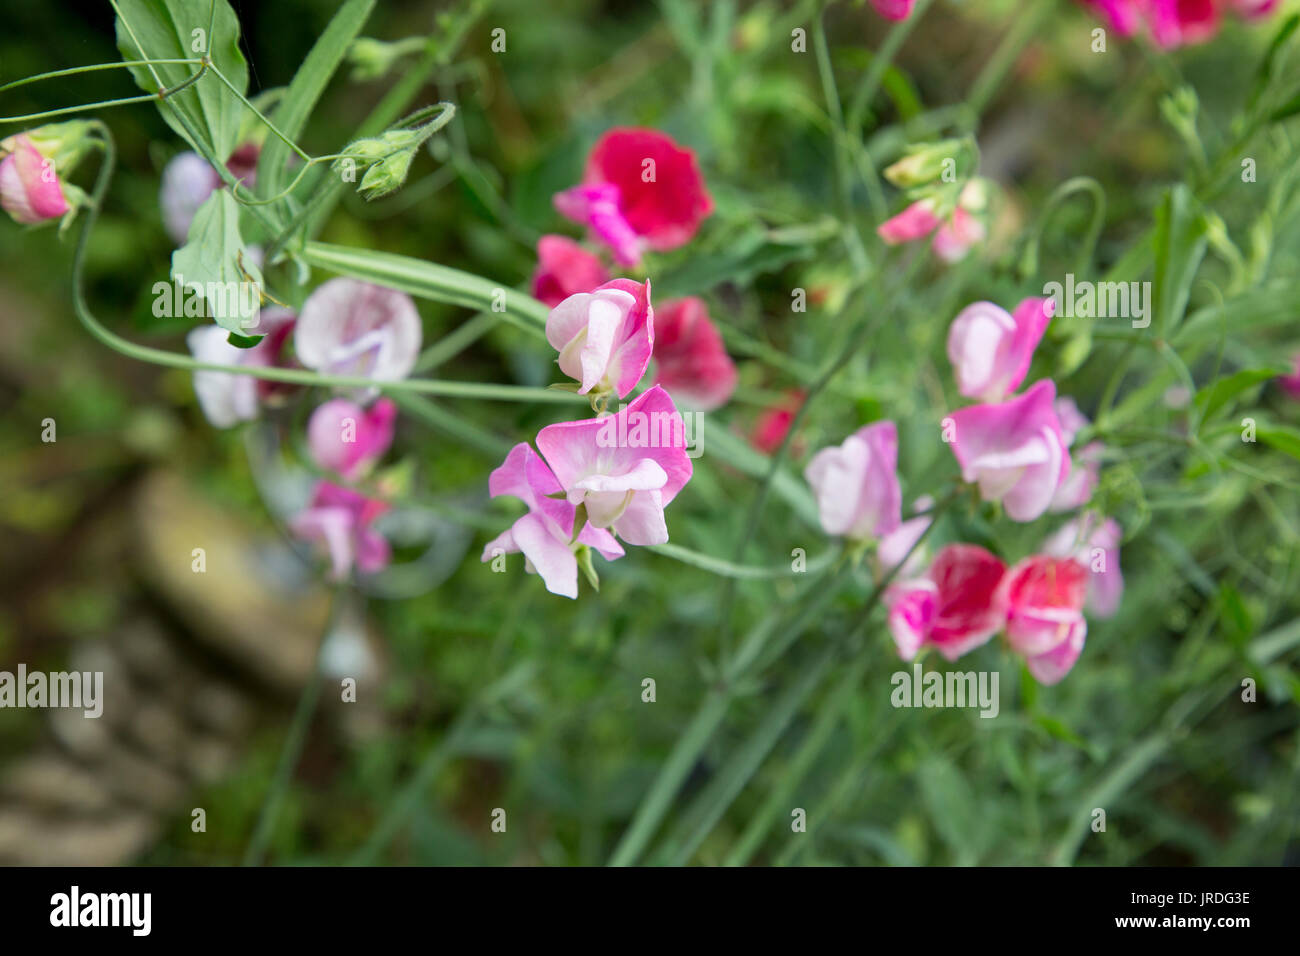 Pink and White Sweet Peas Growing in a Garden Stock Photo